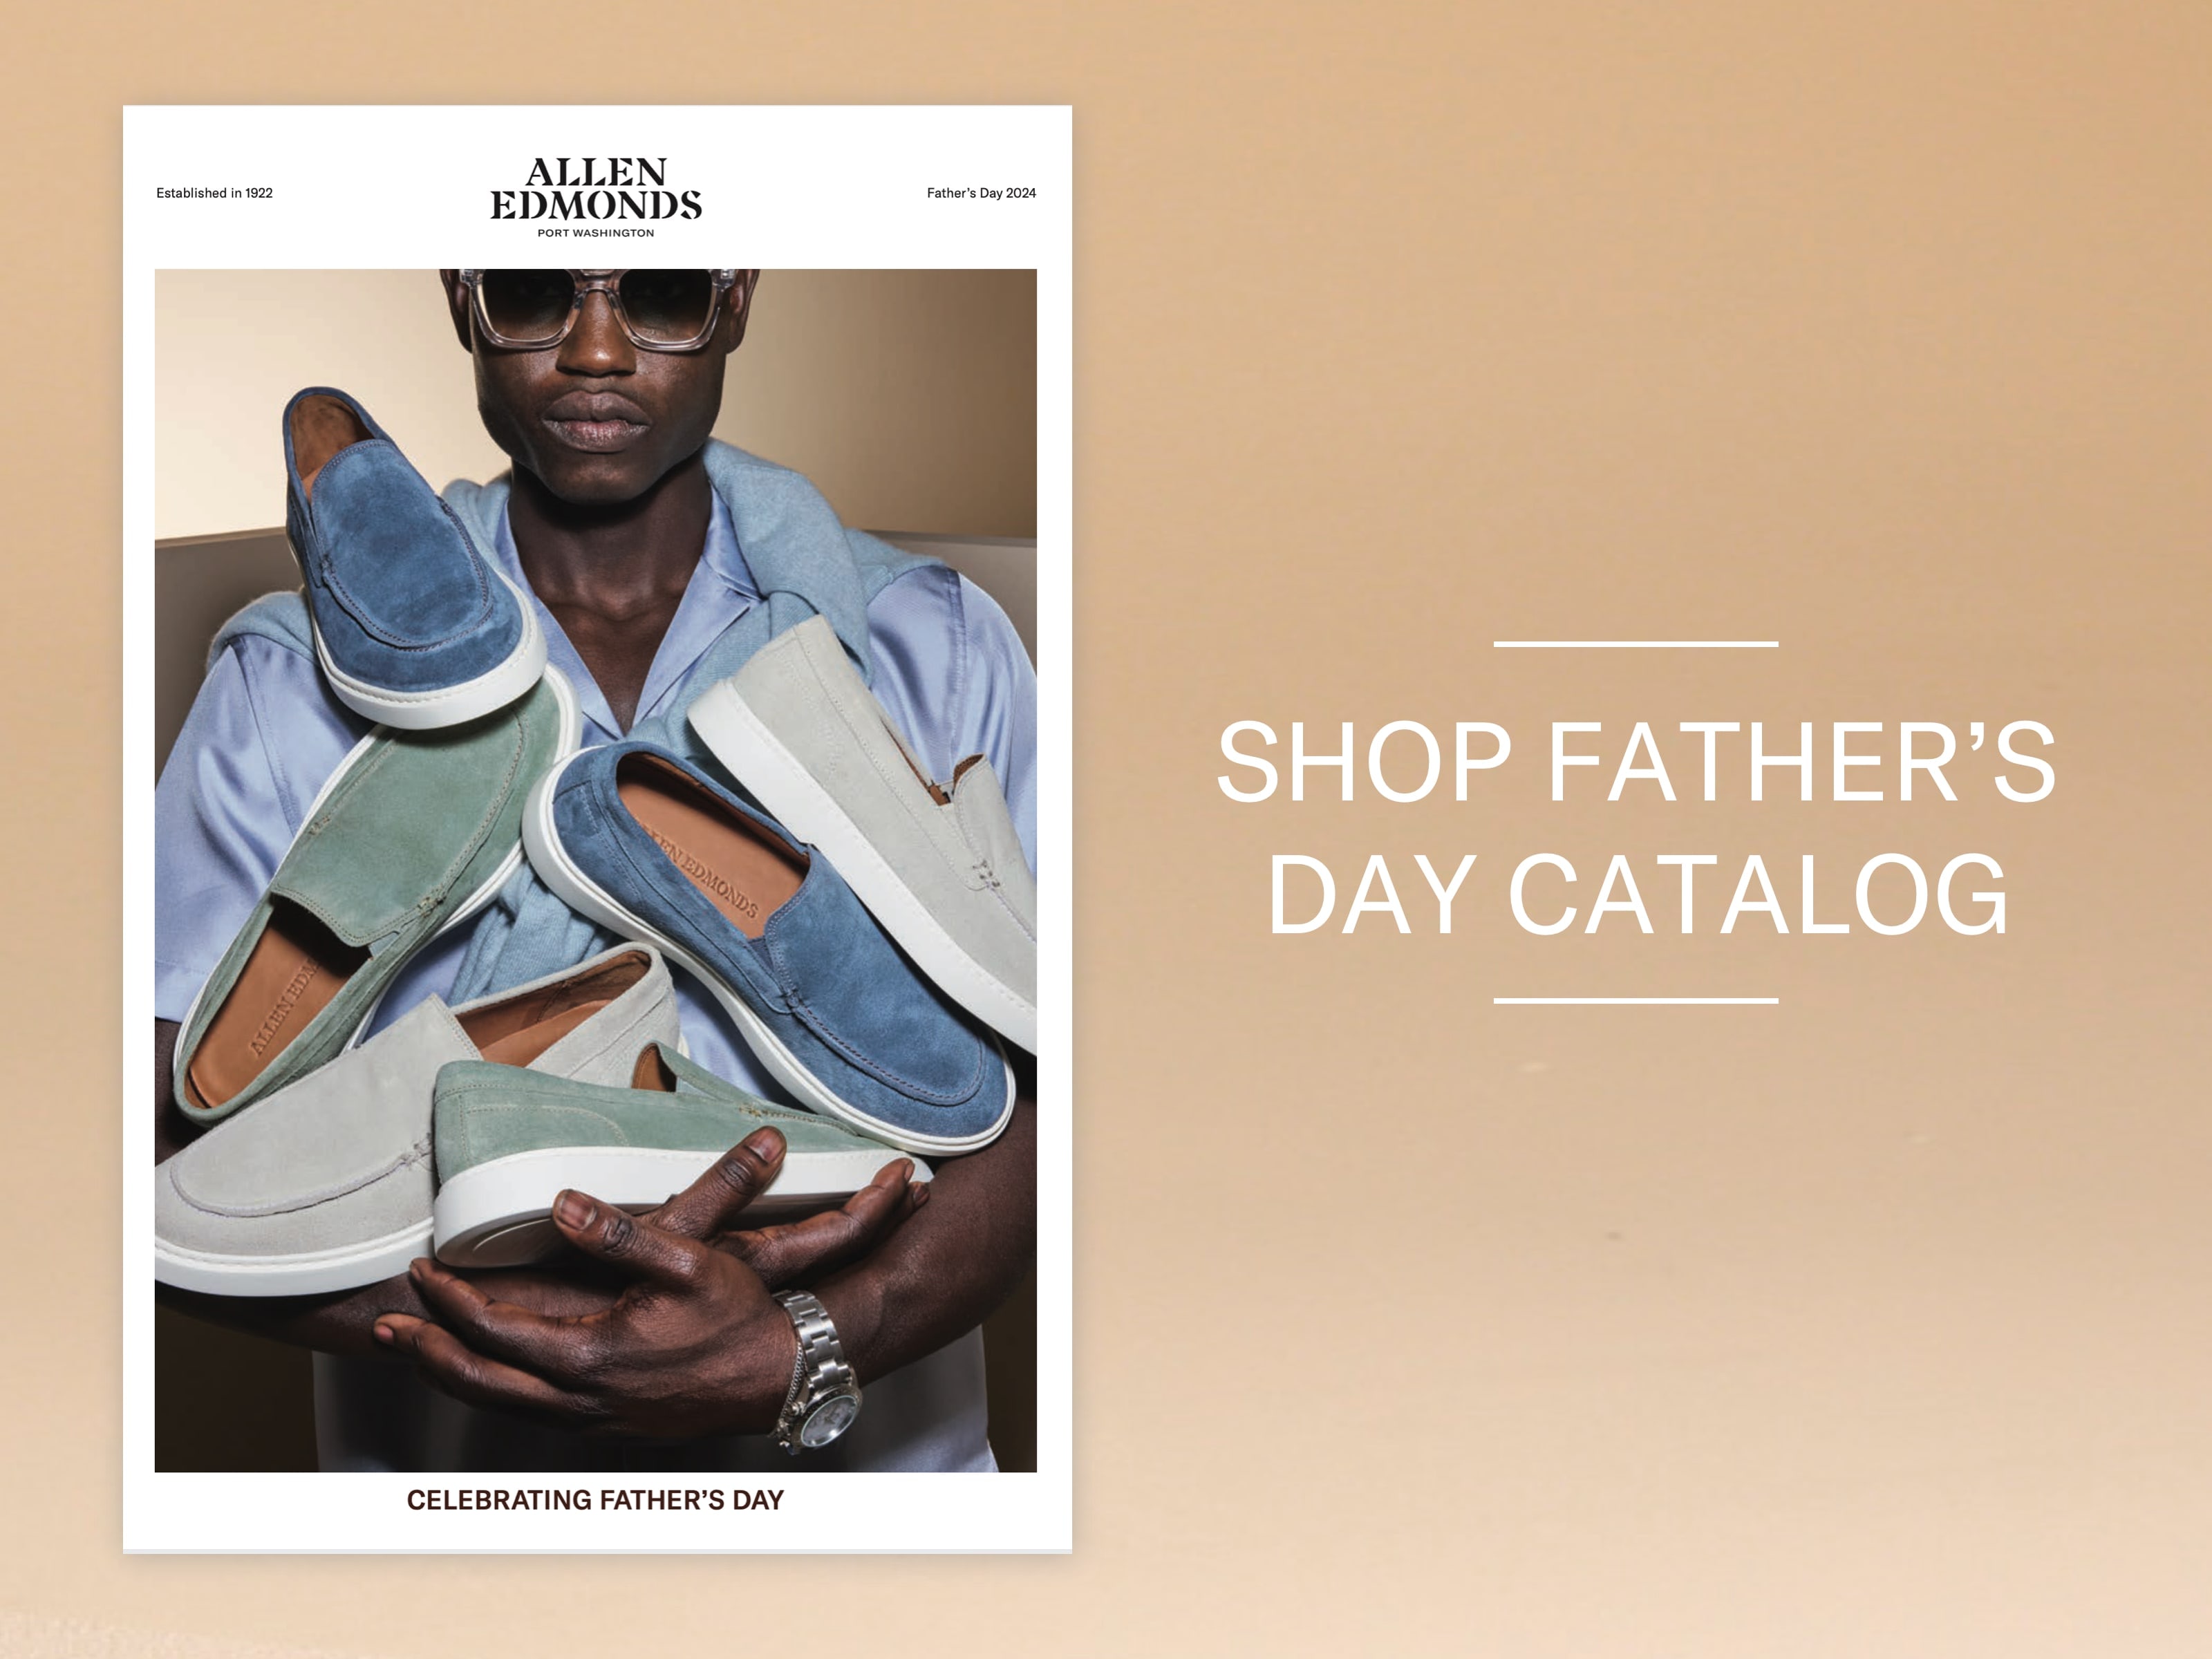 Shop The Father's Day Sale